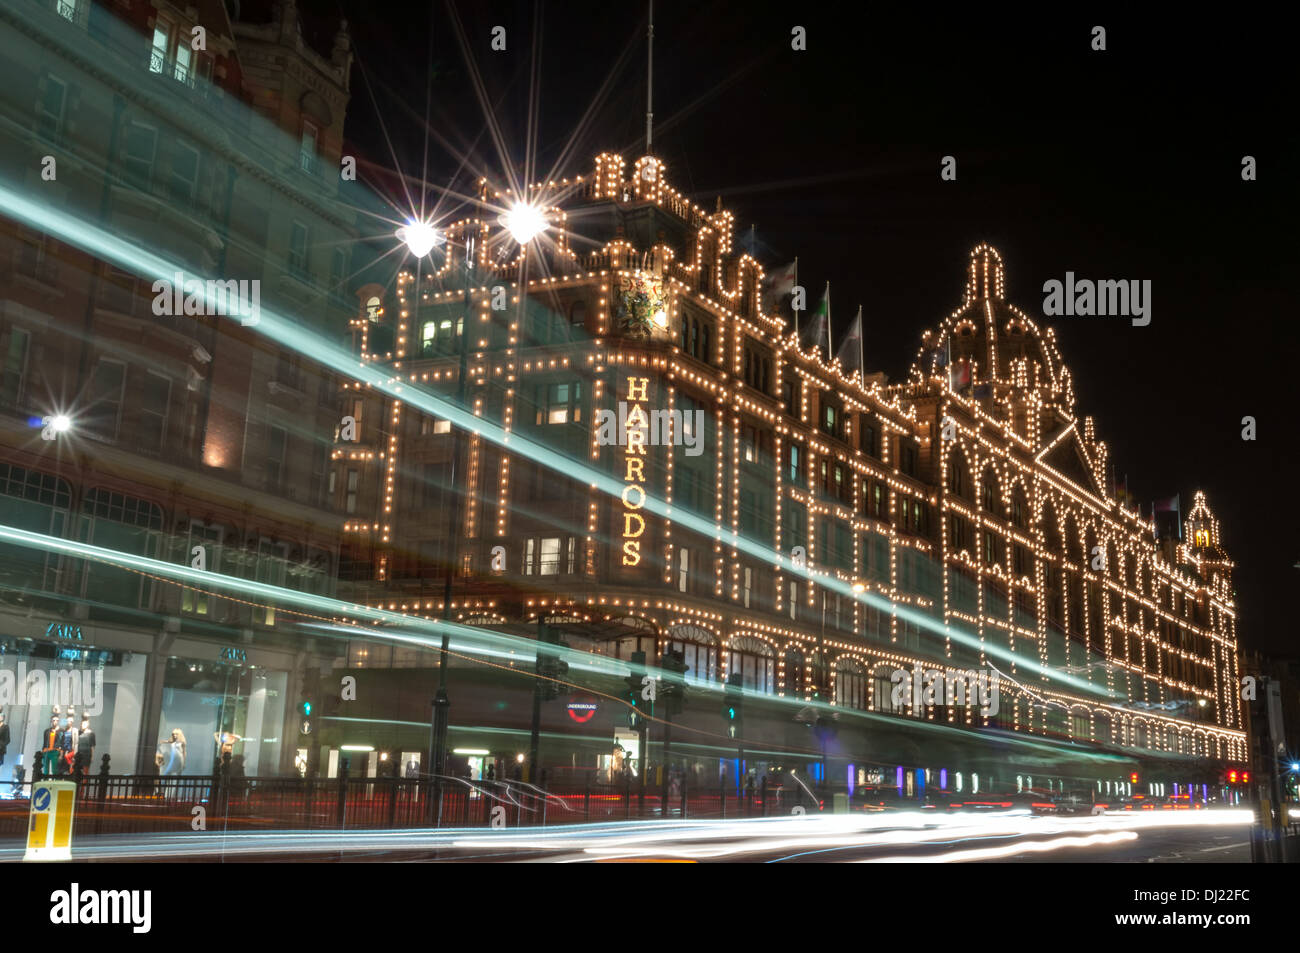 Harrod's department store behind light trails from double decker London bus Stock Photo